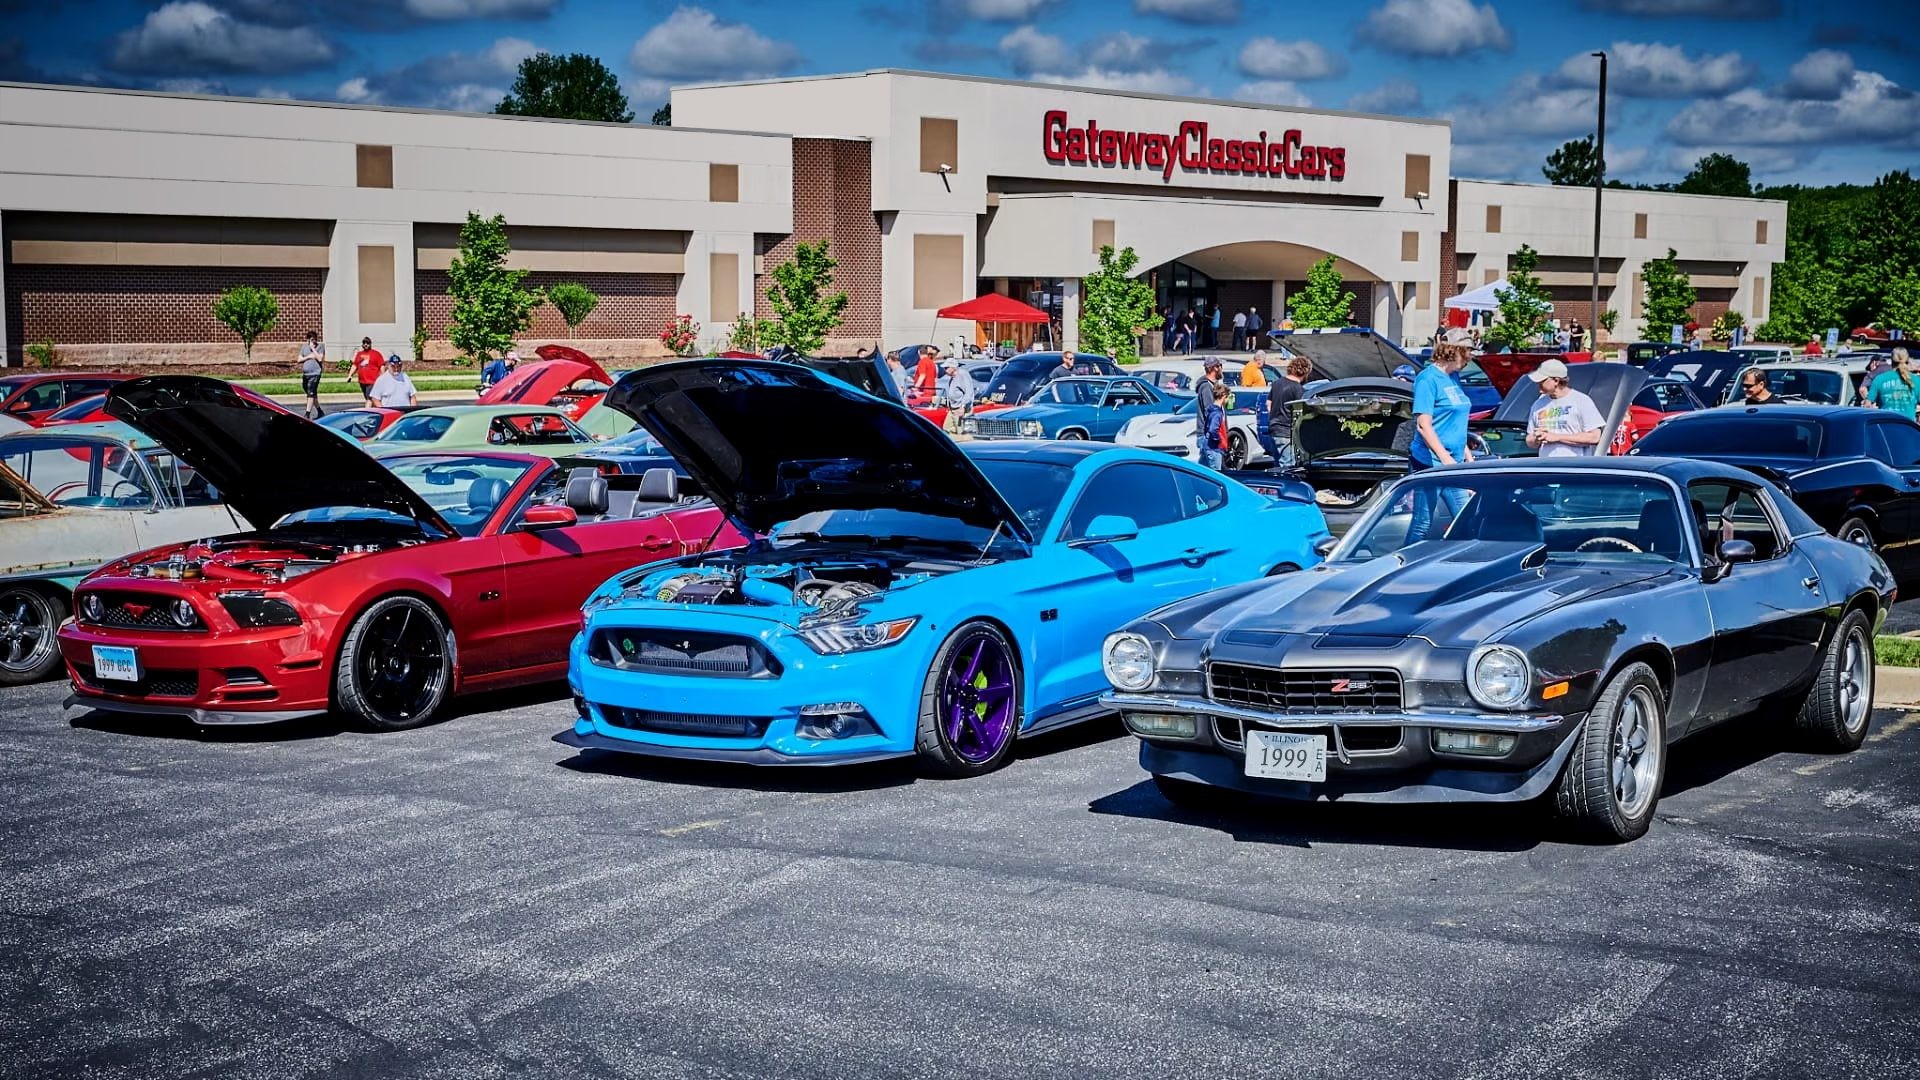 Gateway Classic Cars Celebrates its 25th Anniversary at Showroom Events in 2024